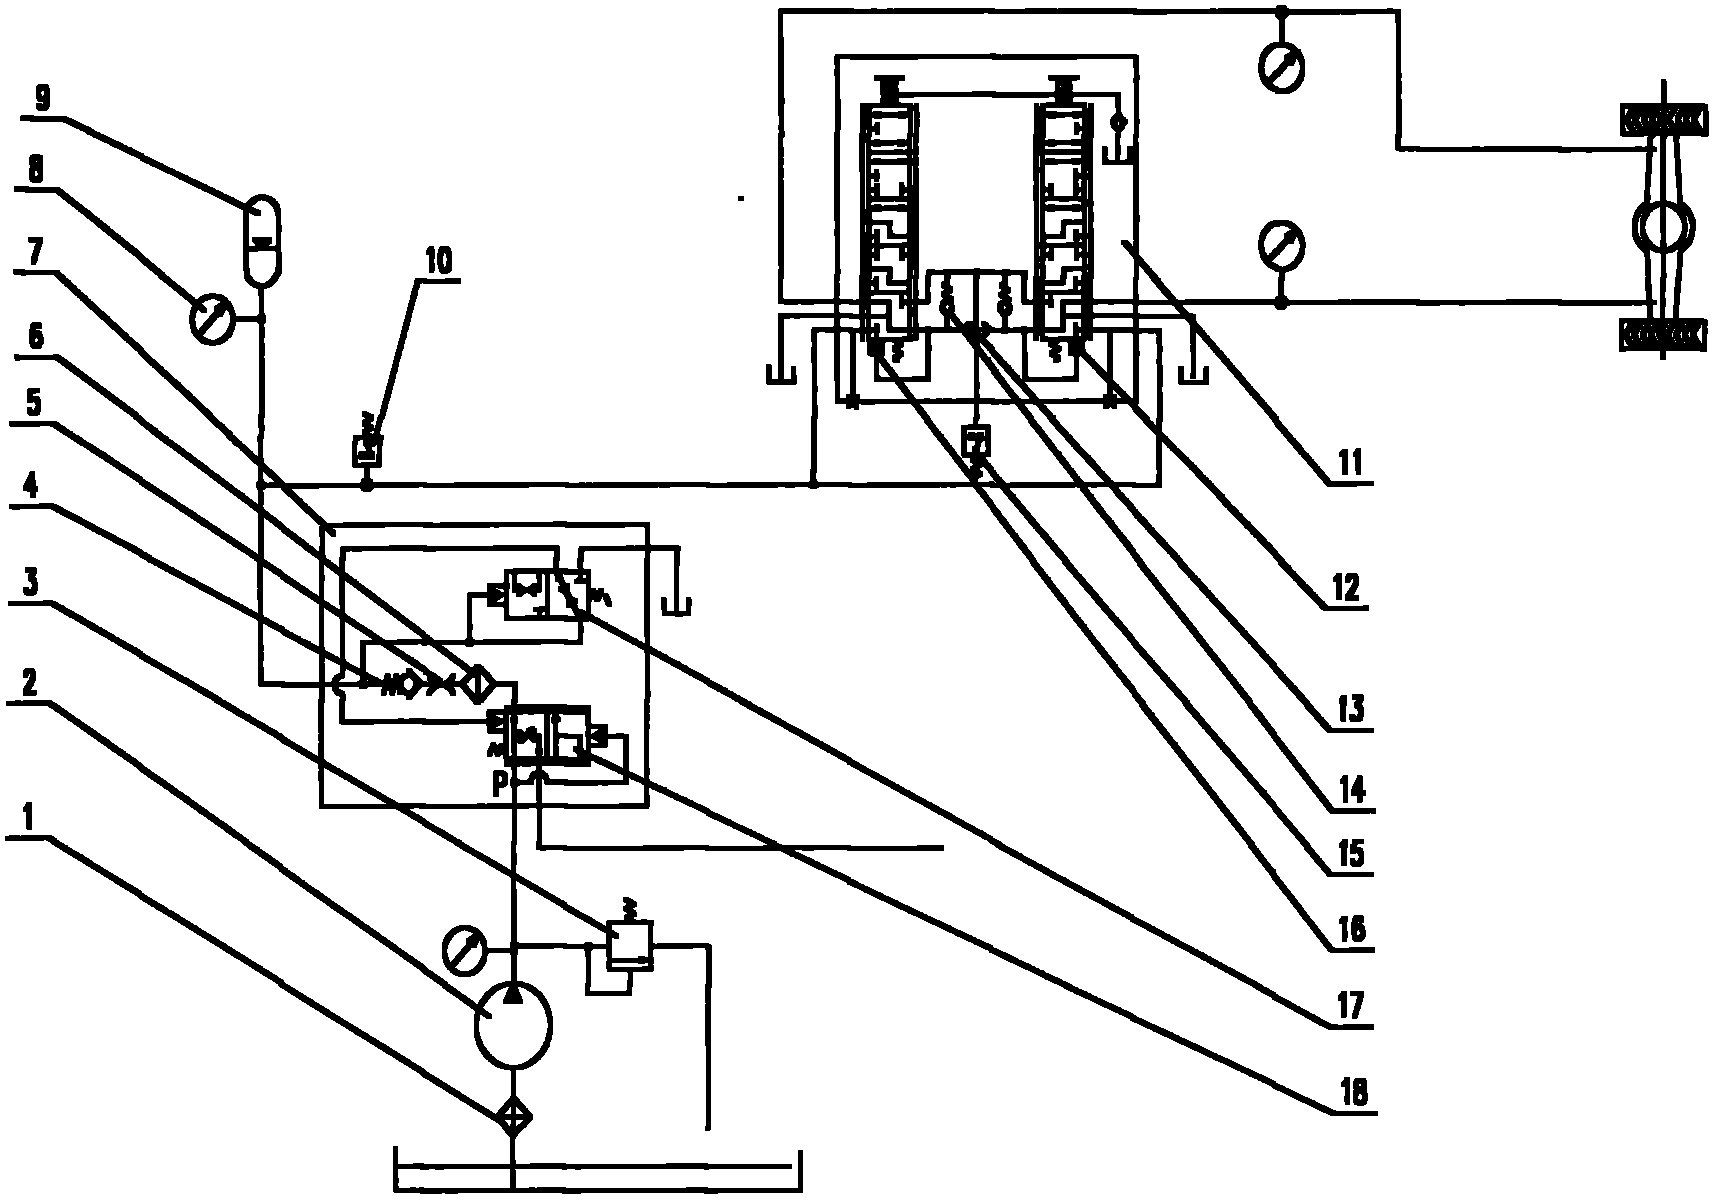 Hydraulic dynamic brake operating system for tractor